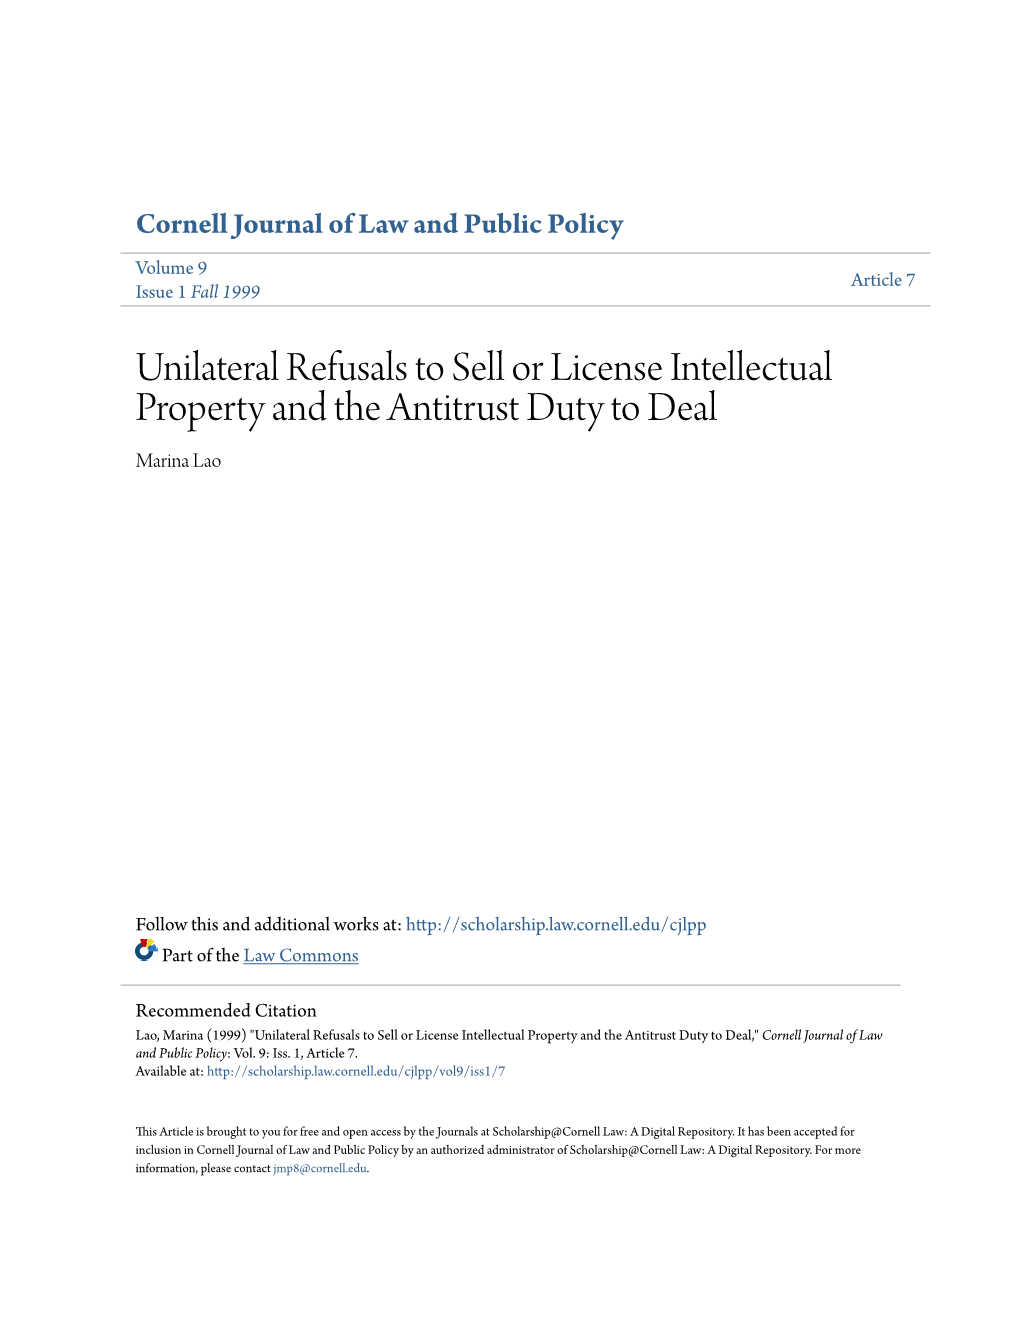 Unilateral Refusals to Sell Or License Intellectual Property and the Antitrust Duty to Deal Marina Lao